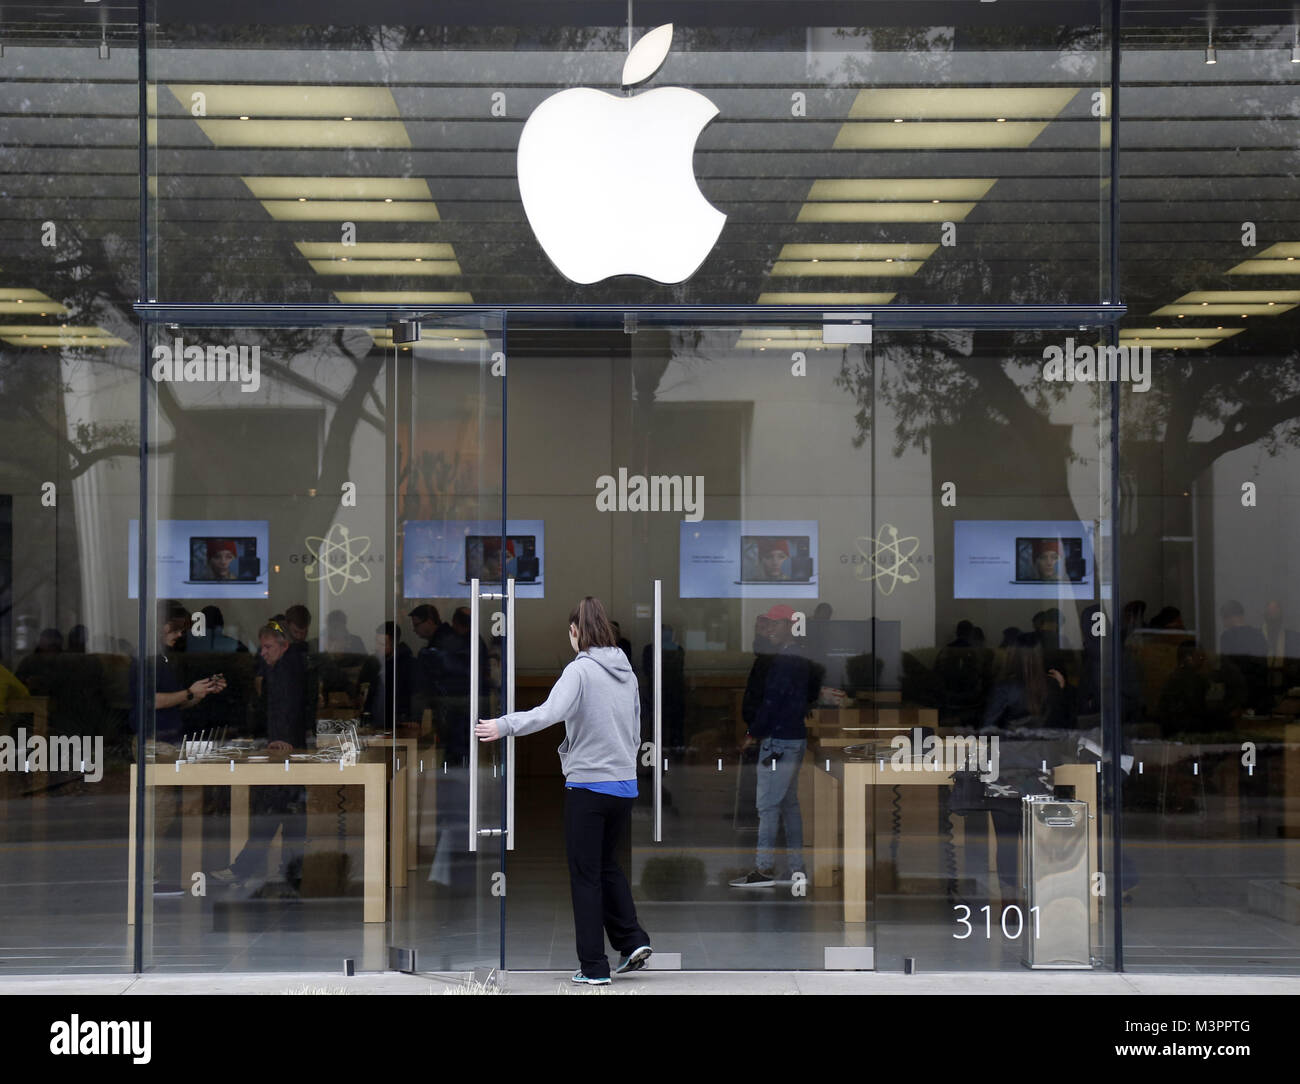 February 12, 2018 - Dallas, TX, USA - An Apple store is seen here in Dallas, Texas, on Monday, February 12, 2018. Apple will post earnings reports on Tuesday. Zuma Press/Mike Fuentes (Credit Image: © Mike Fuentes via ZUMA Wire) Stock Photo